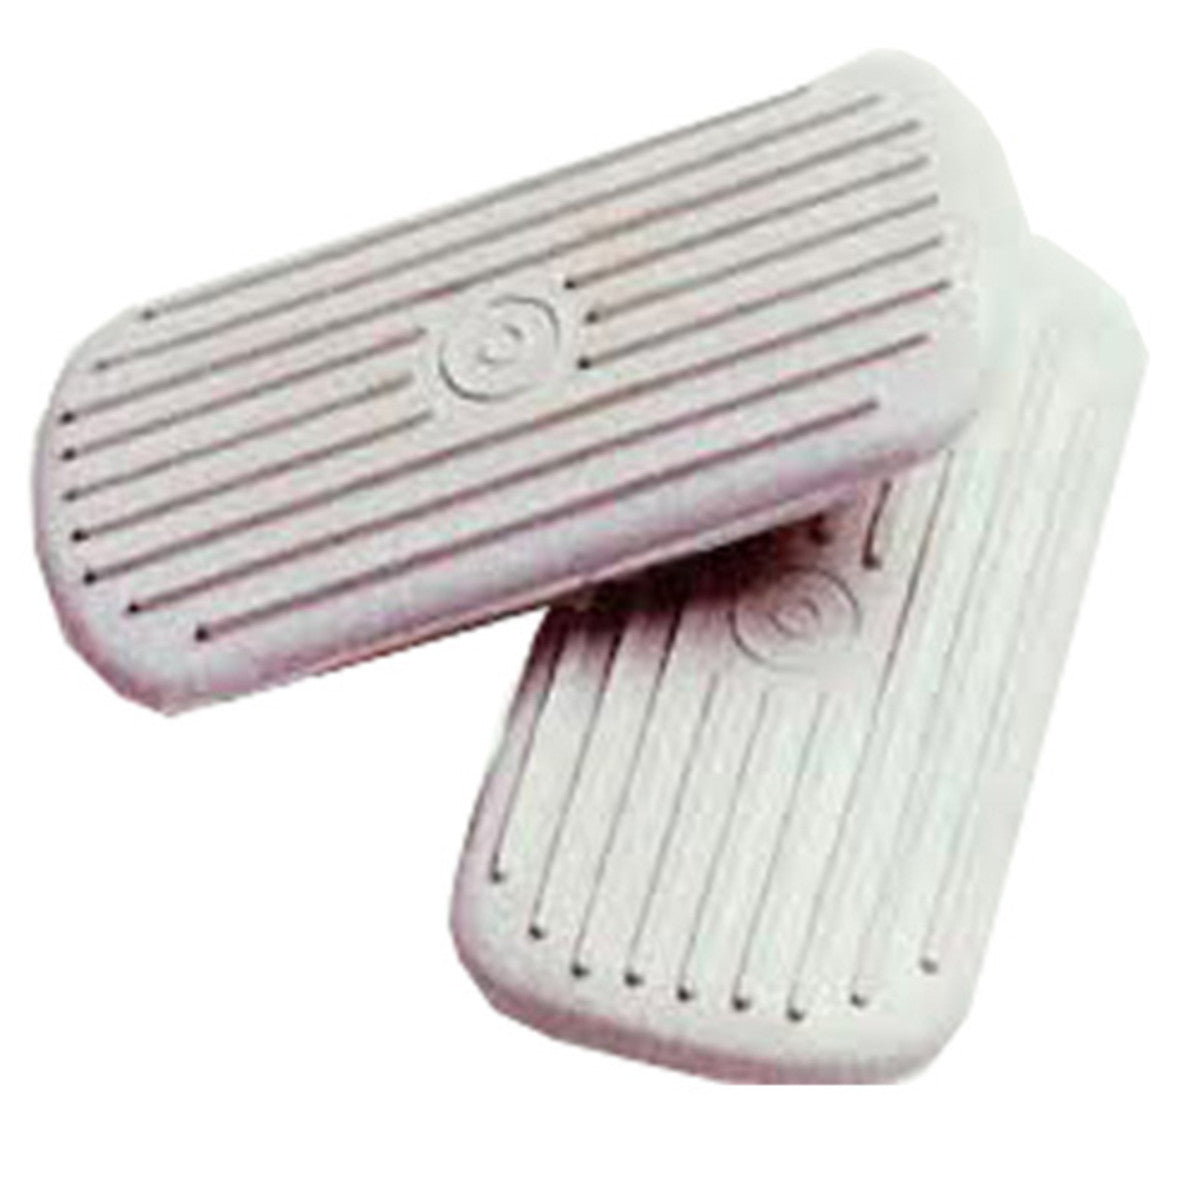 Replacement Pads for Prussian and Foot Free Irons